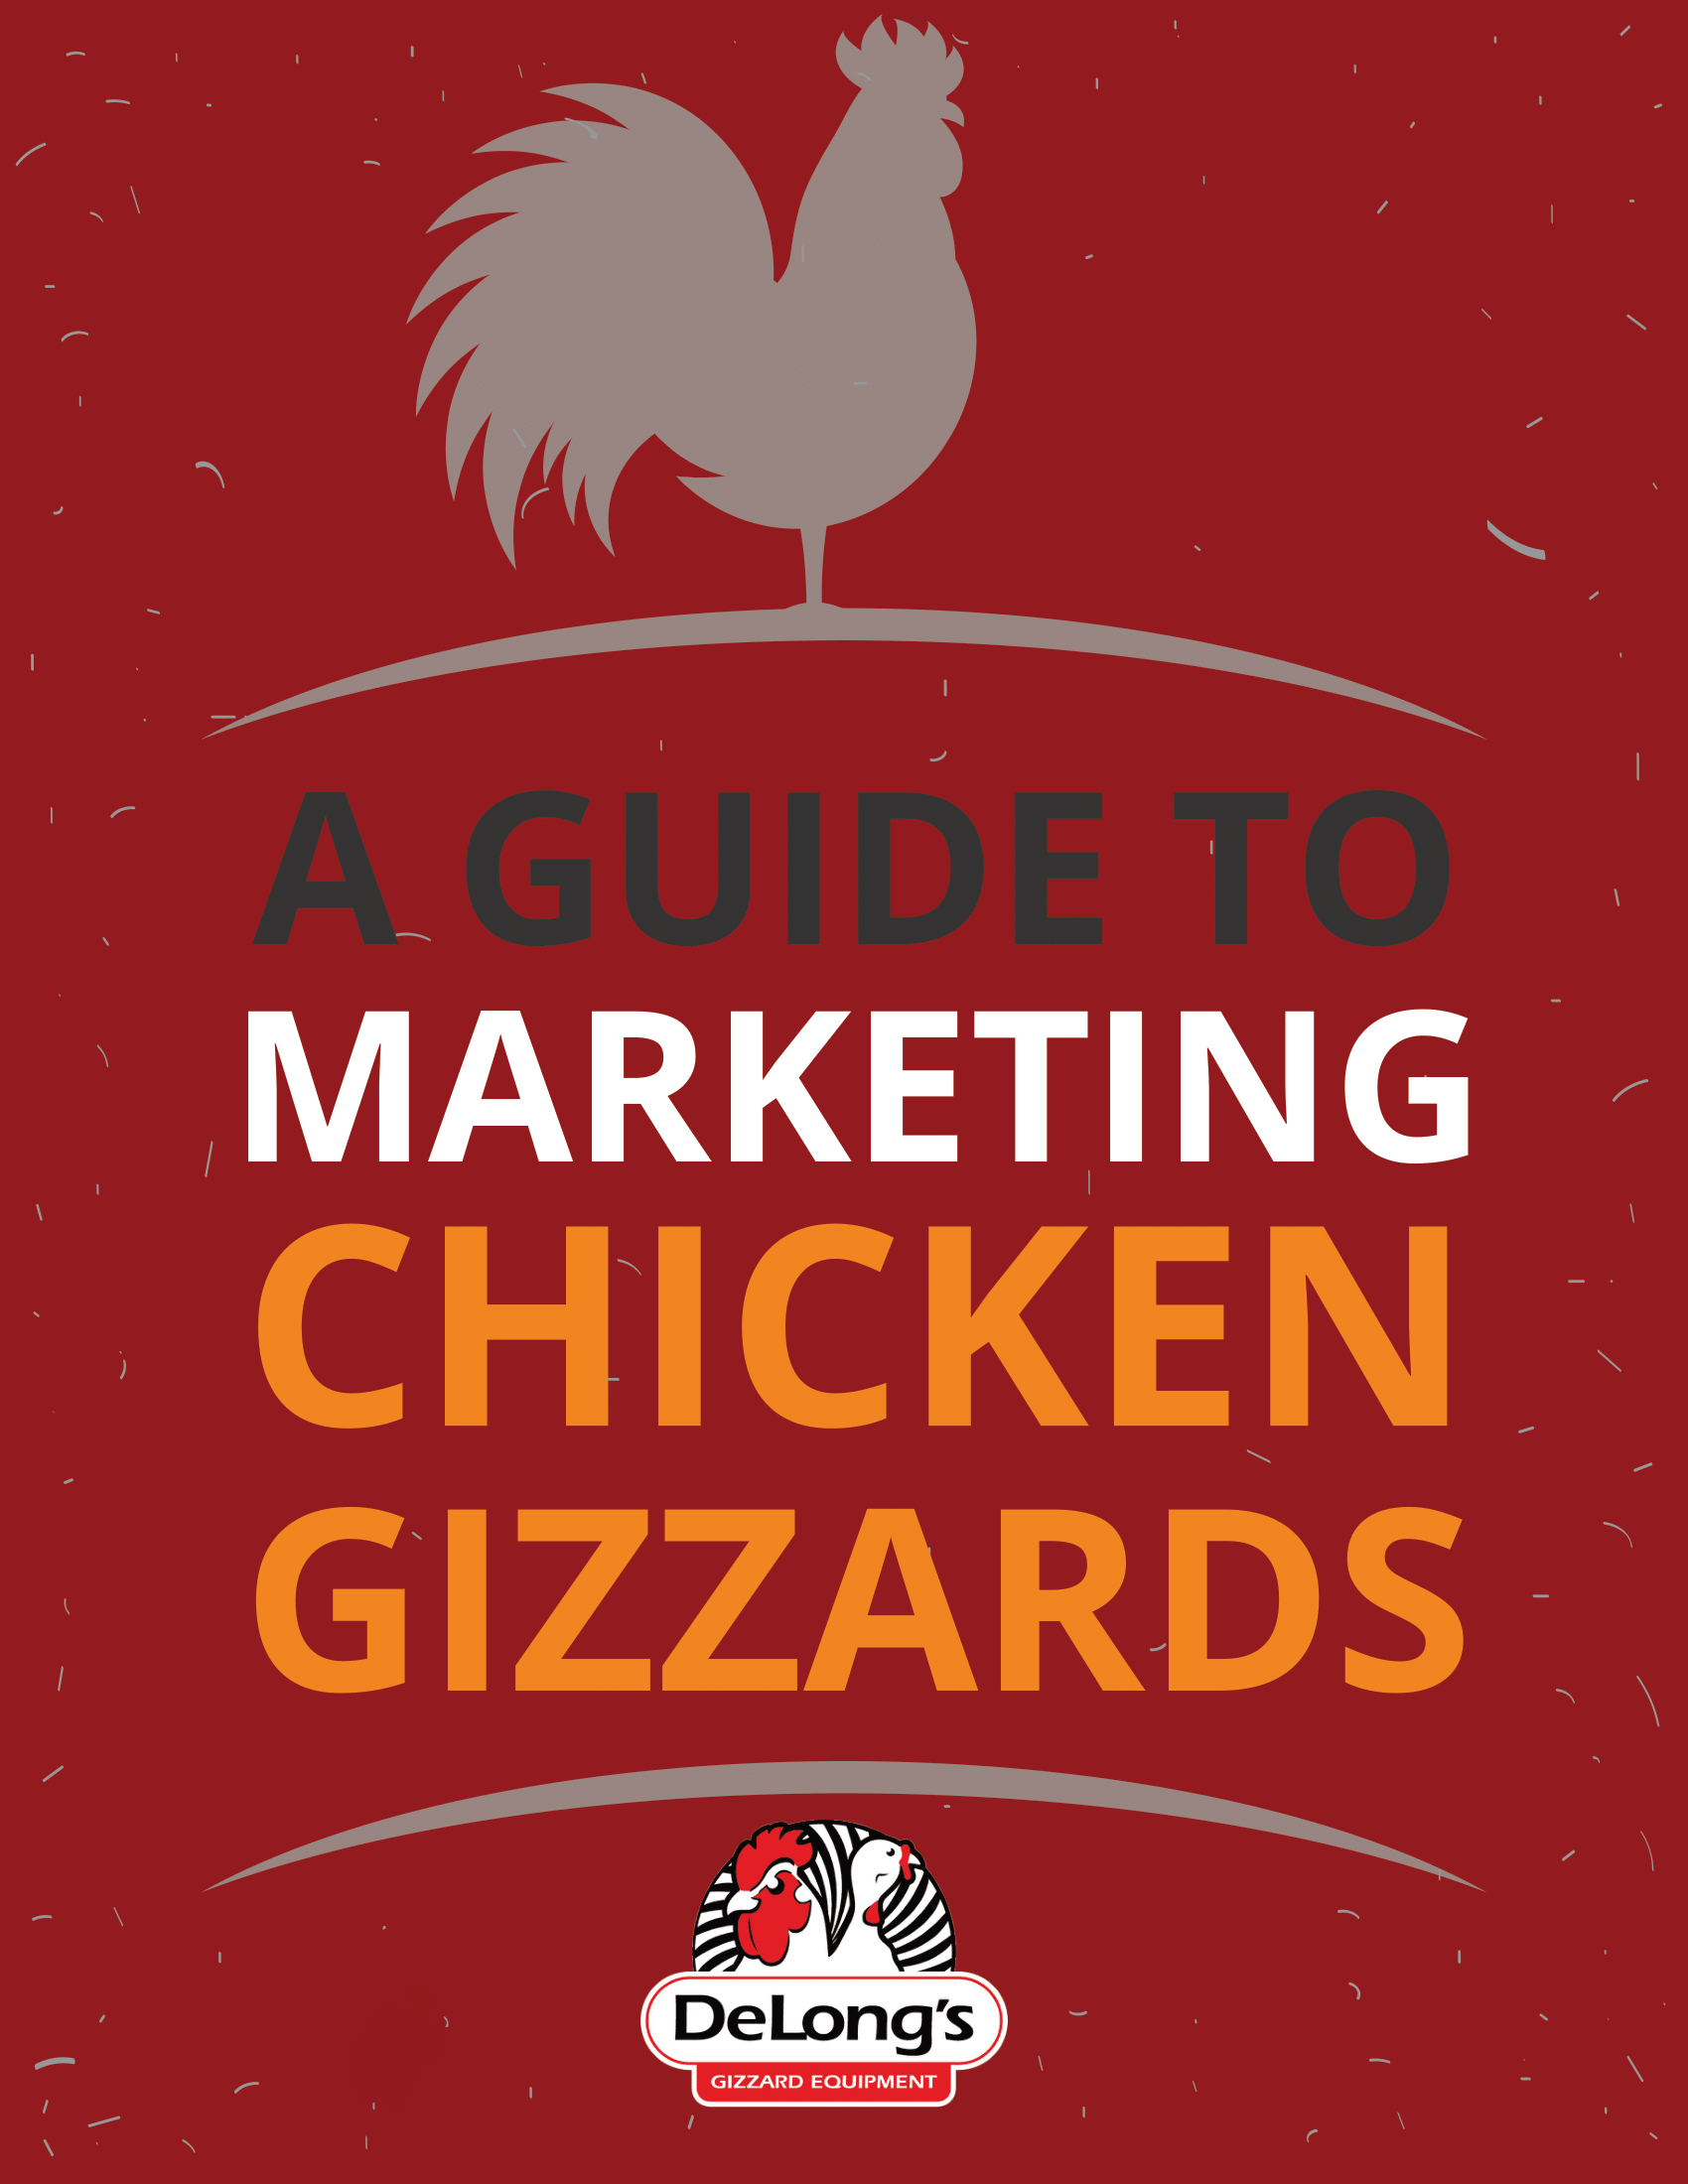 DeLong's A Guide To Marketing Chicken Gizzards